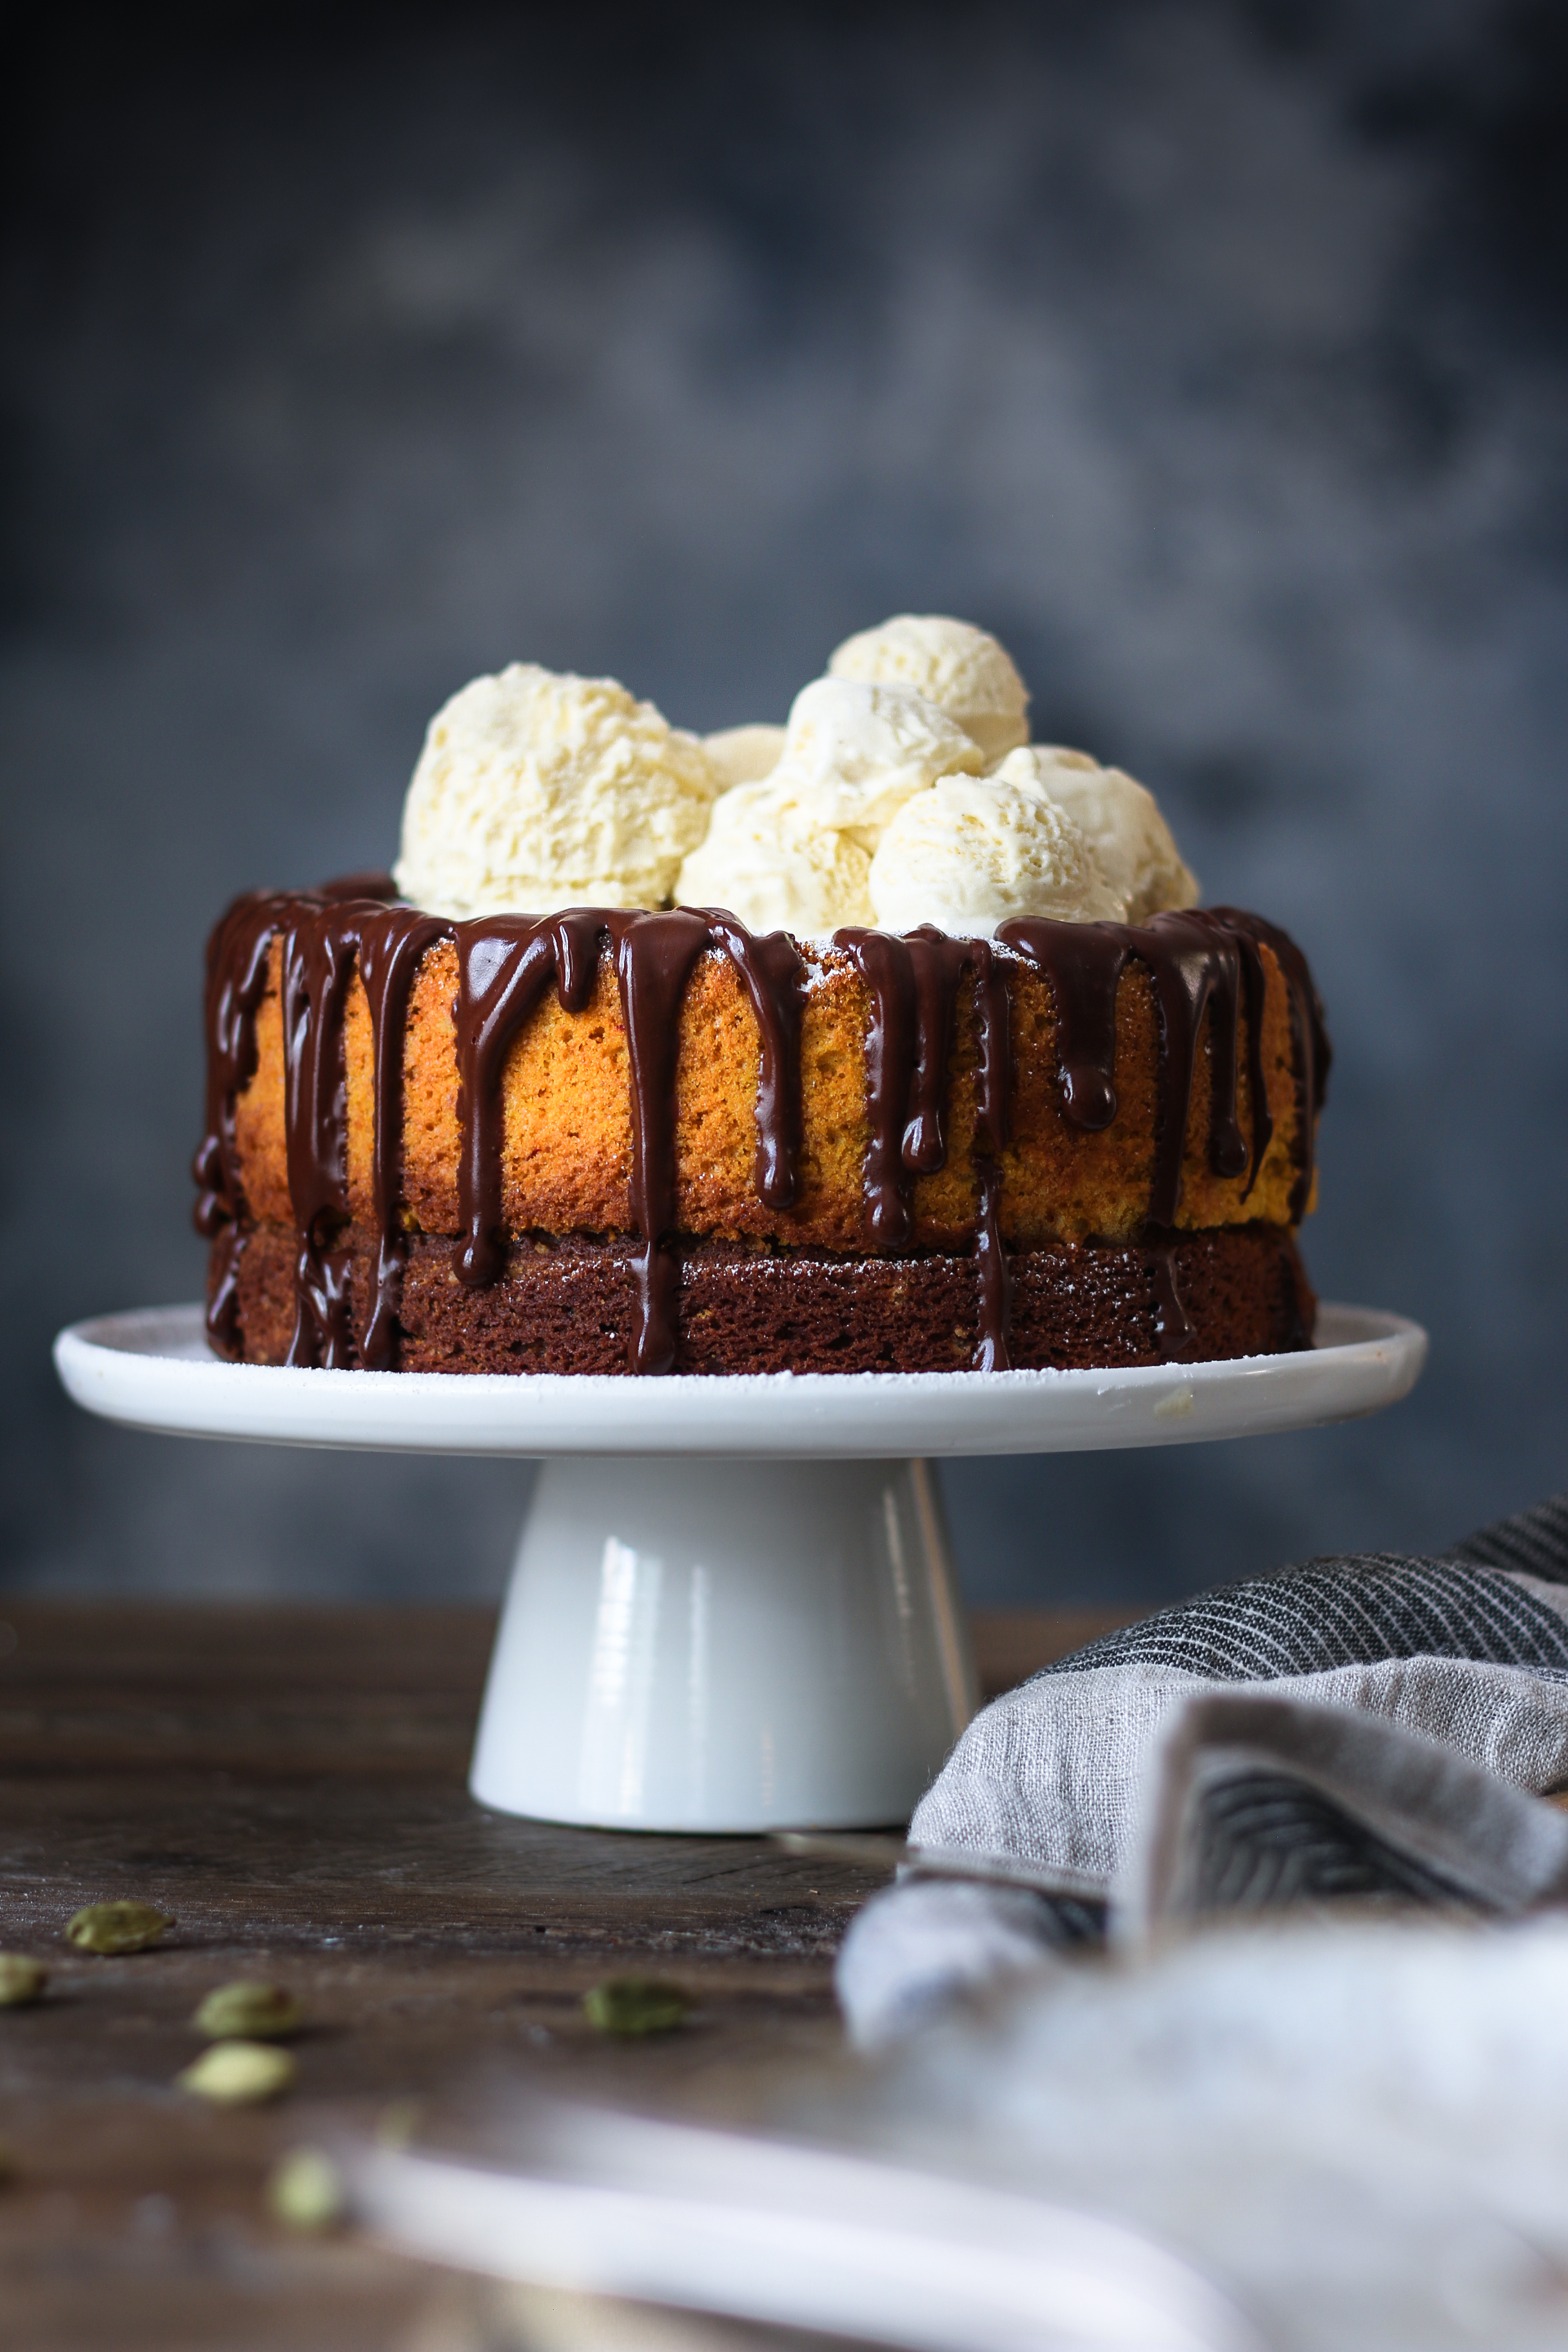 BROWN BUTTER PUMPKIN CHOCOLATE CAKE WITH SAFFRON AND CARDAMOM